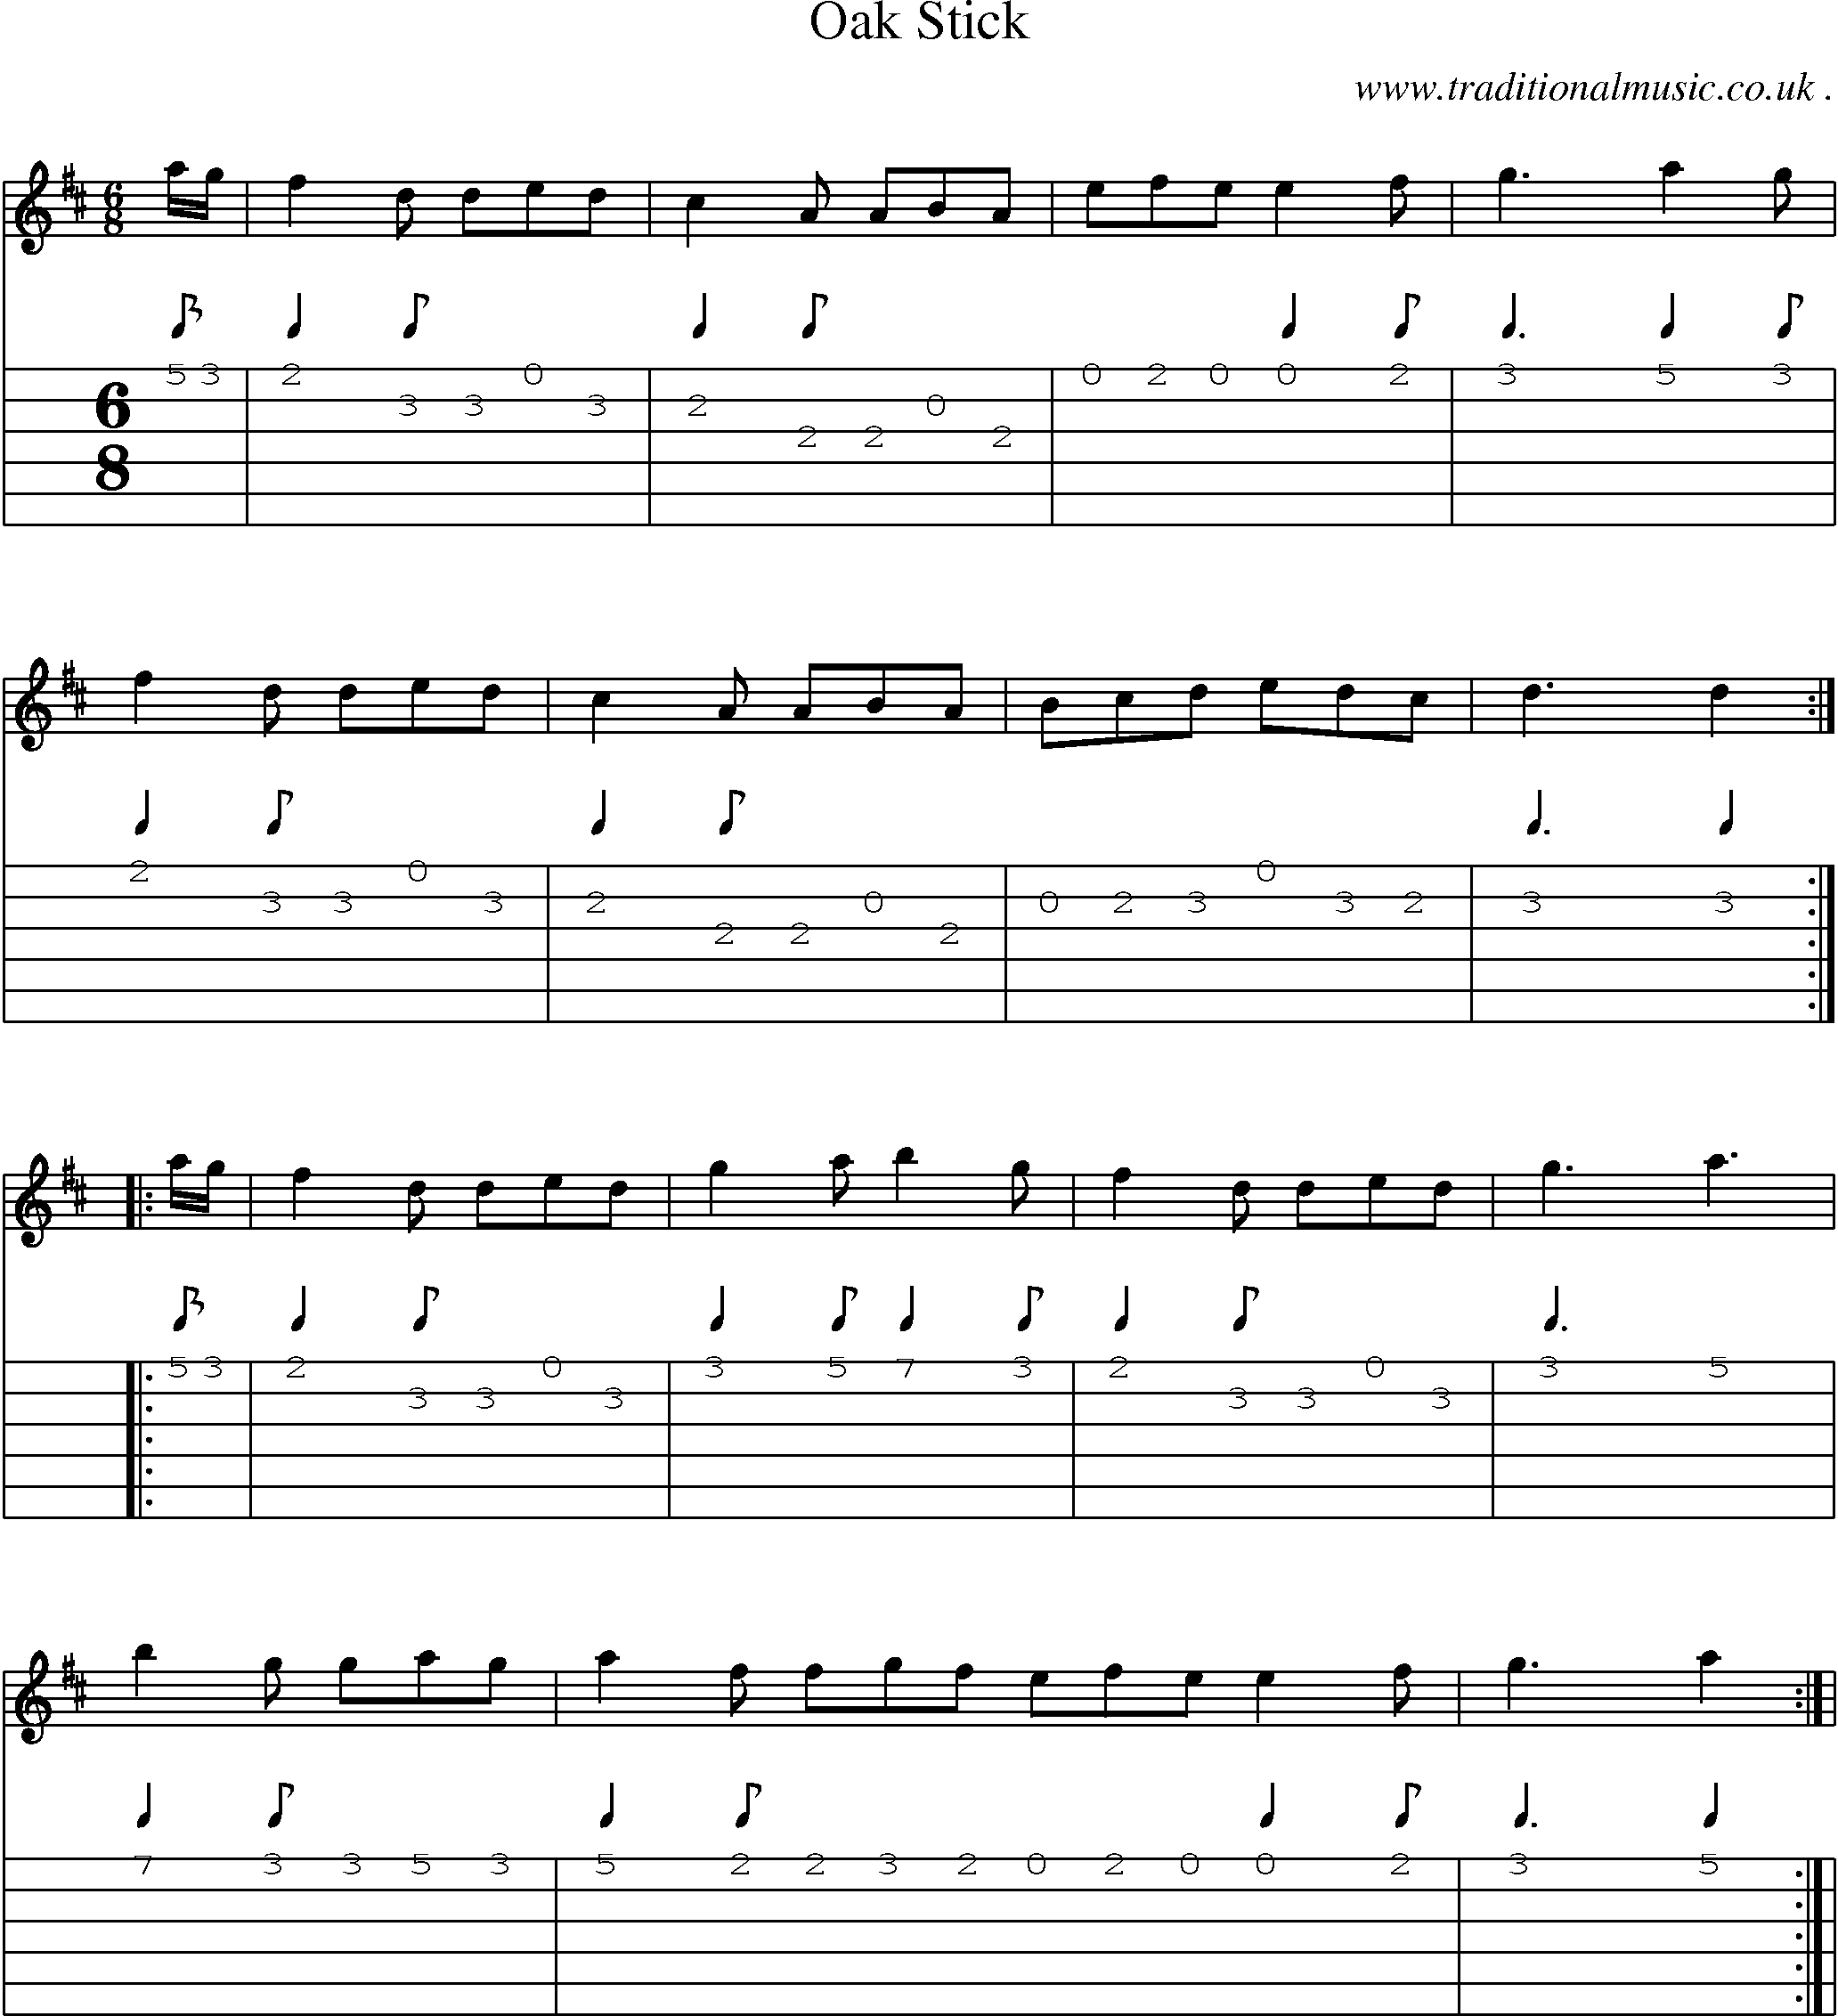 Sheet-Music and Guitar Tabs for Oak Stick